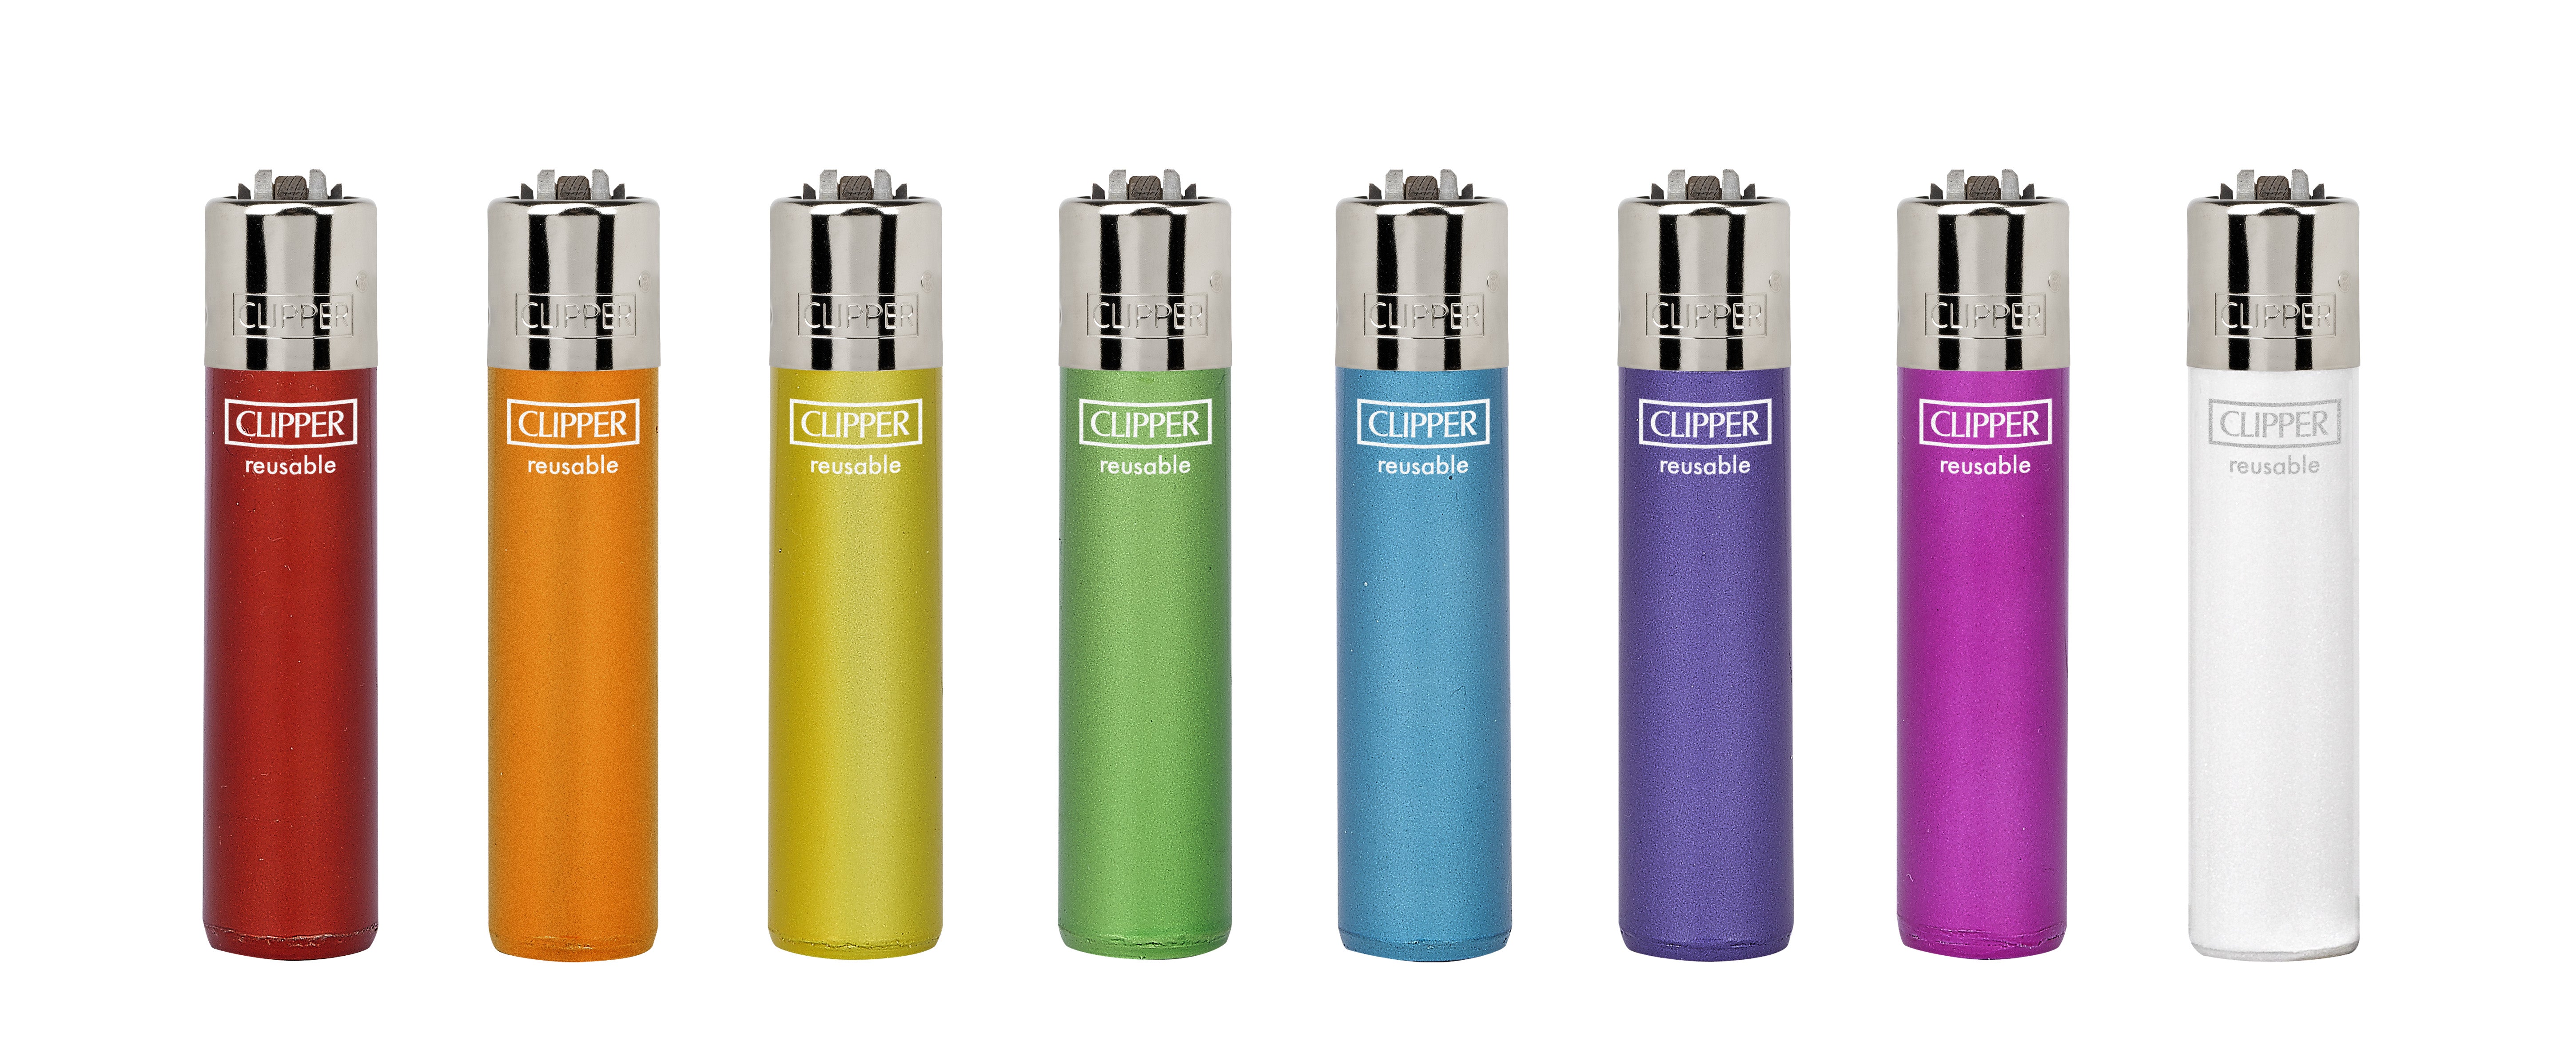 Clipper Classic Large | Painted - Crystal Rainbow